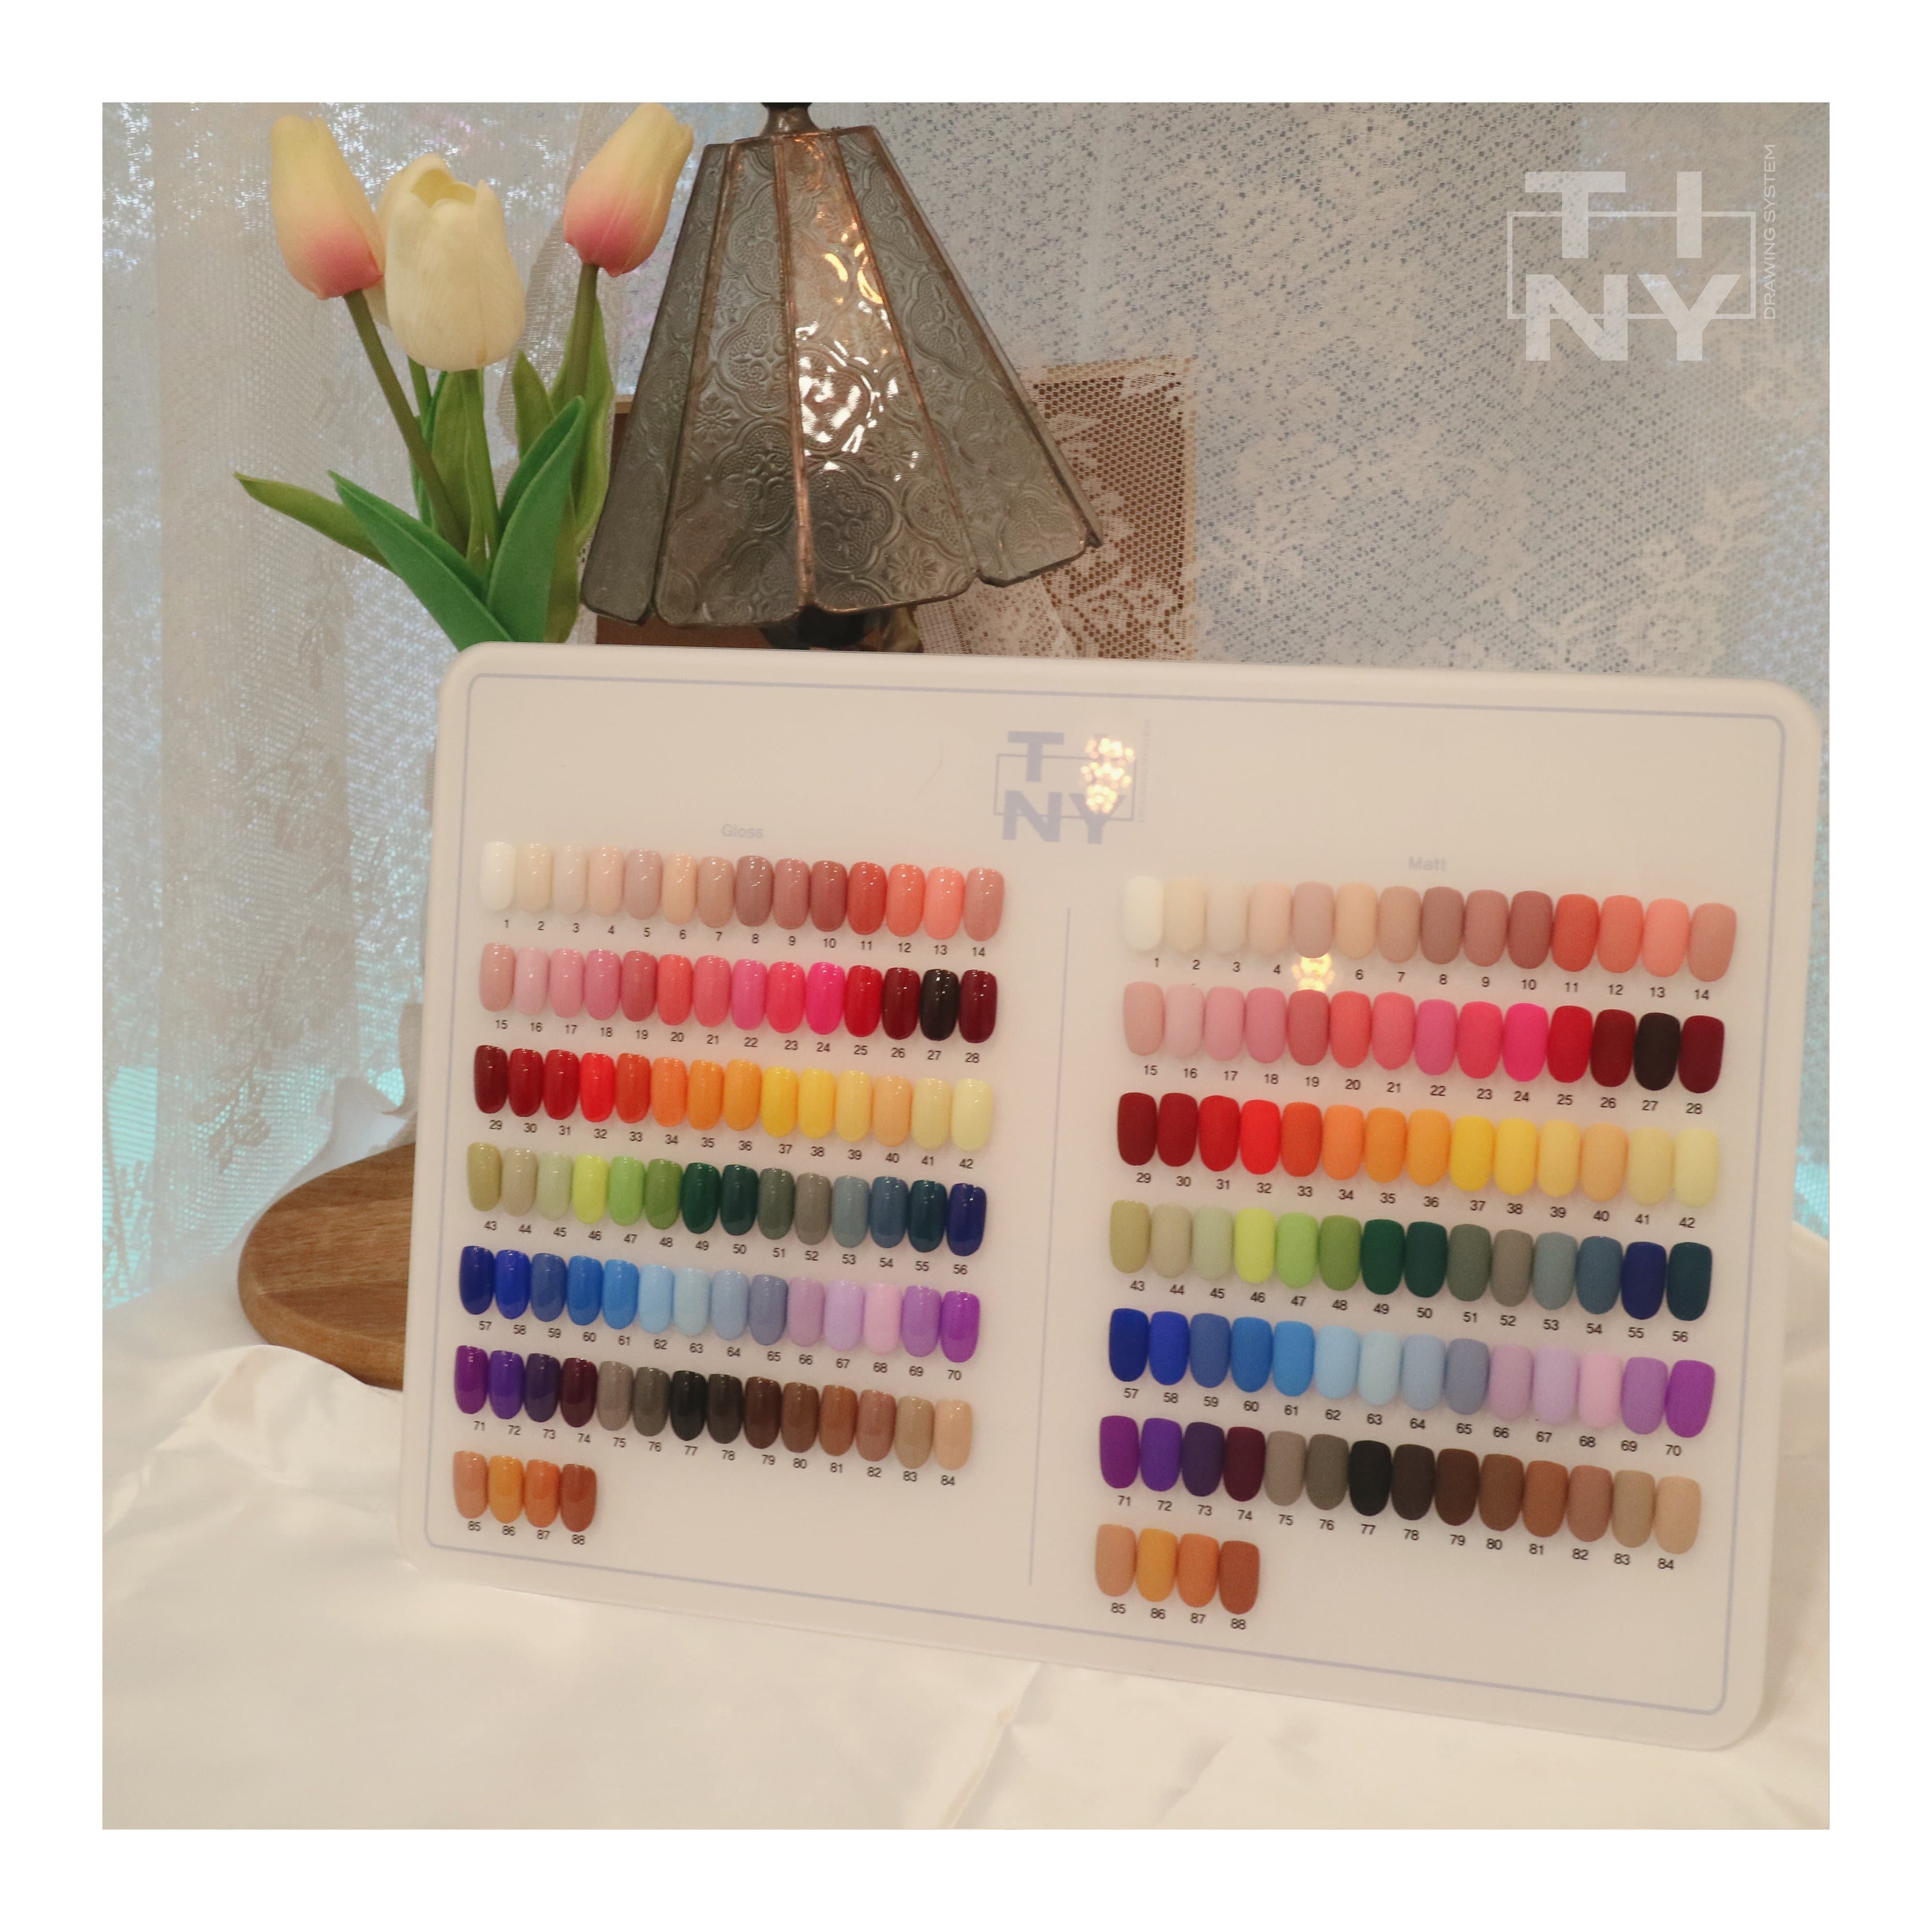 Tiny Gelling Gelling 88 Colour Full Set [NO extra discount]